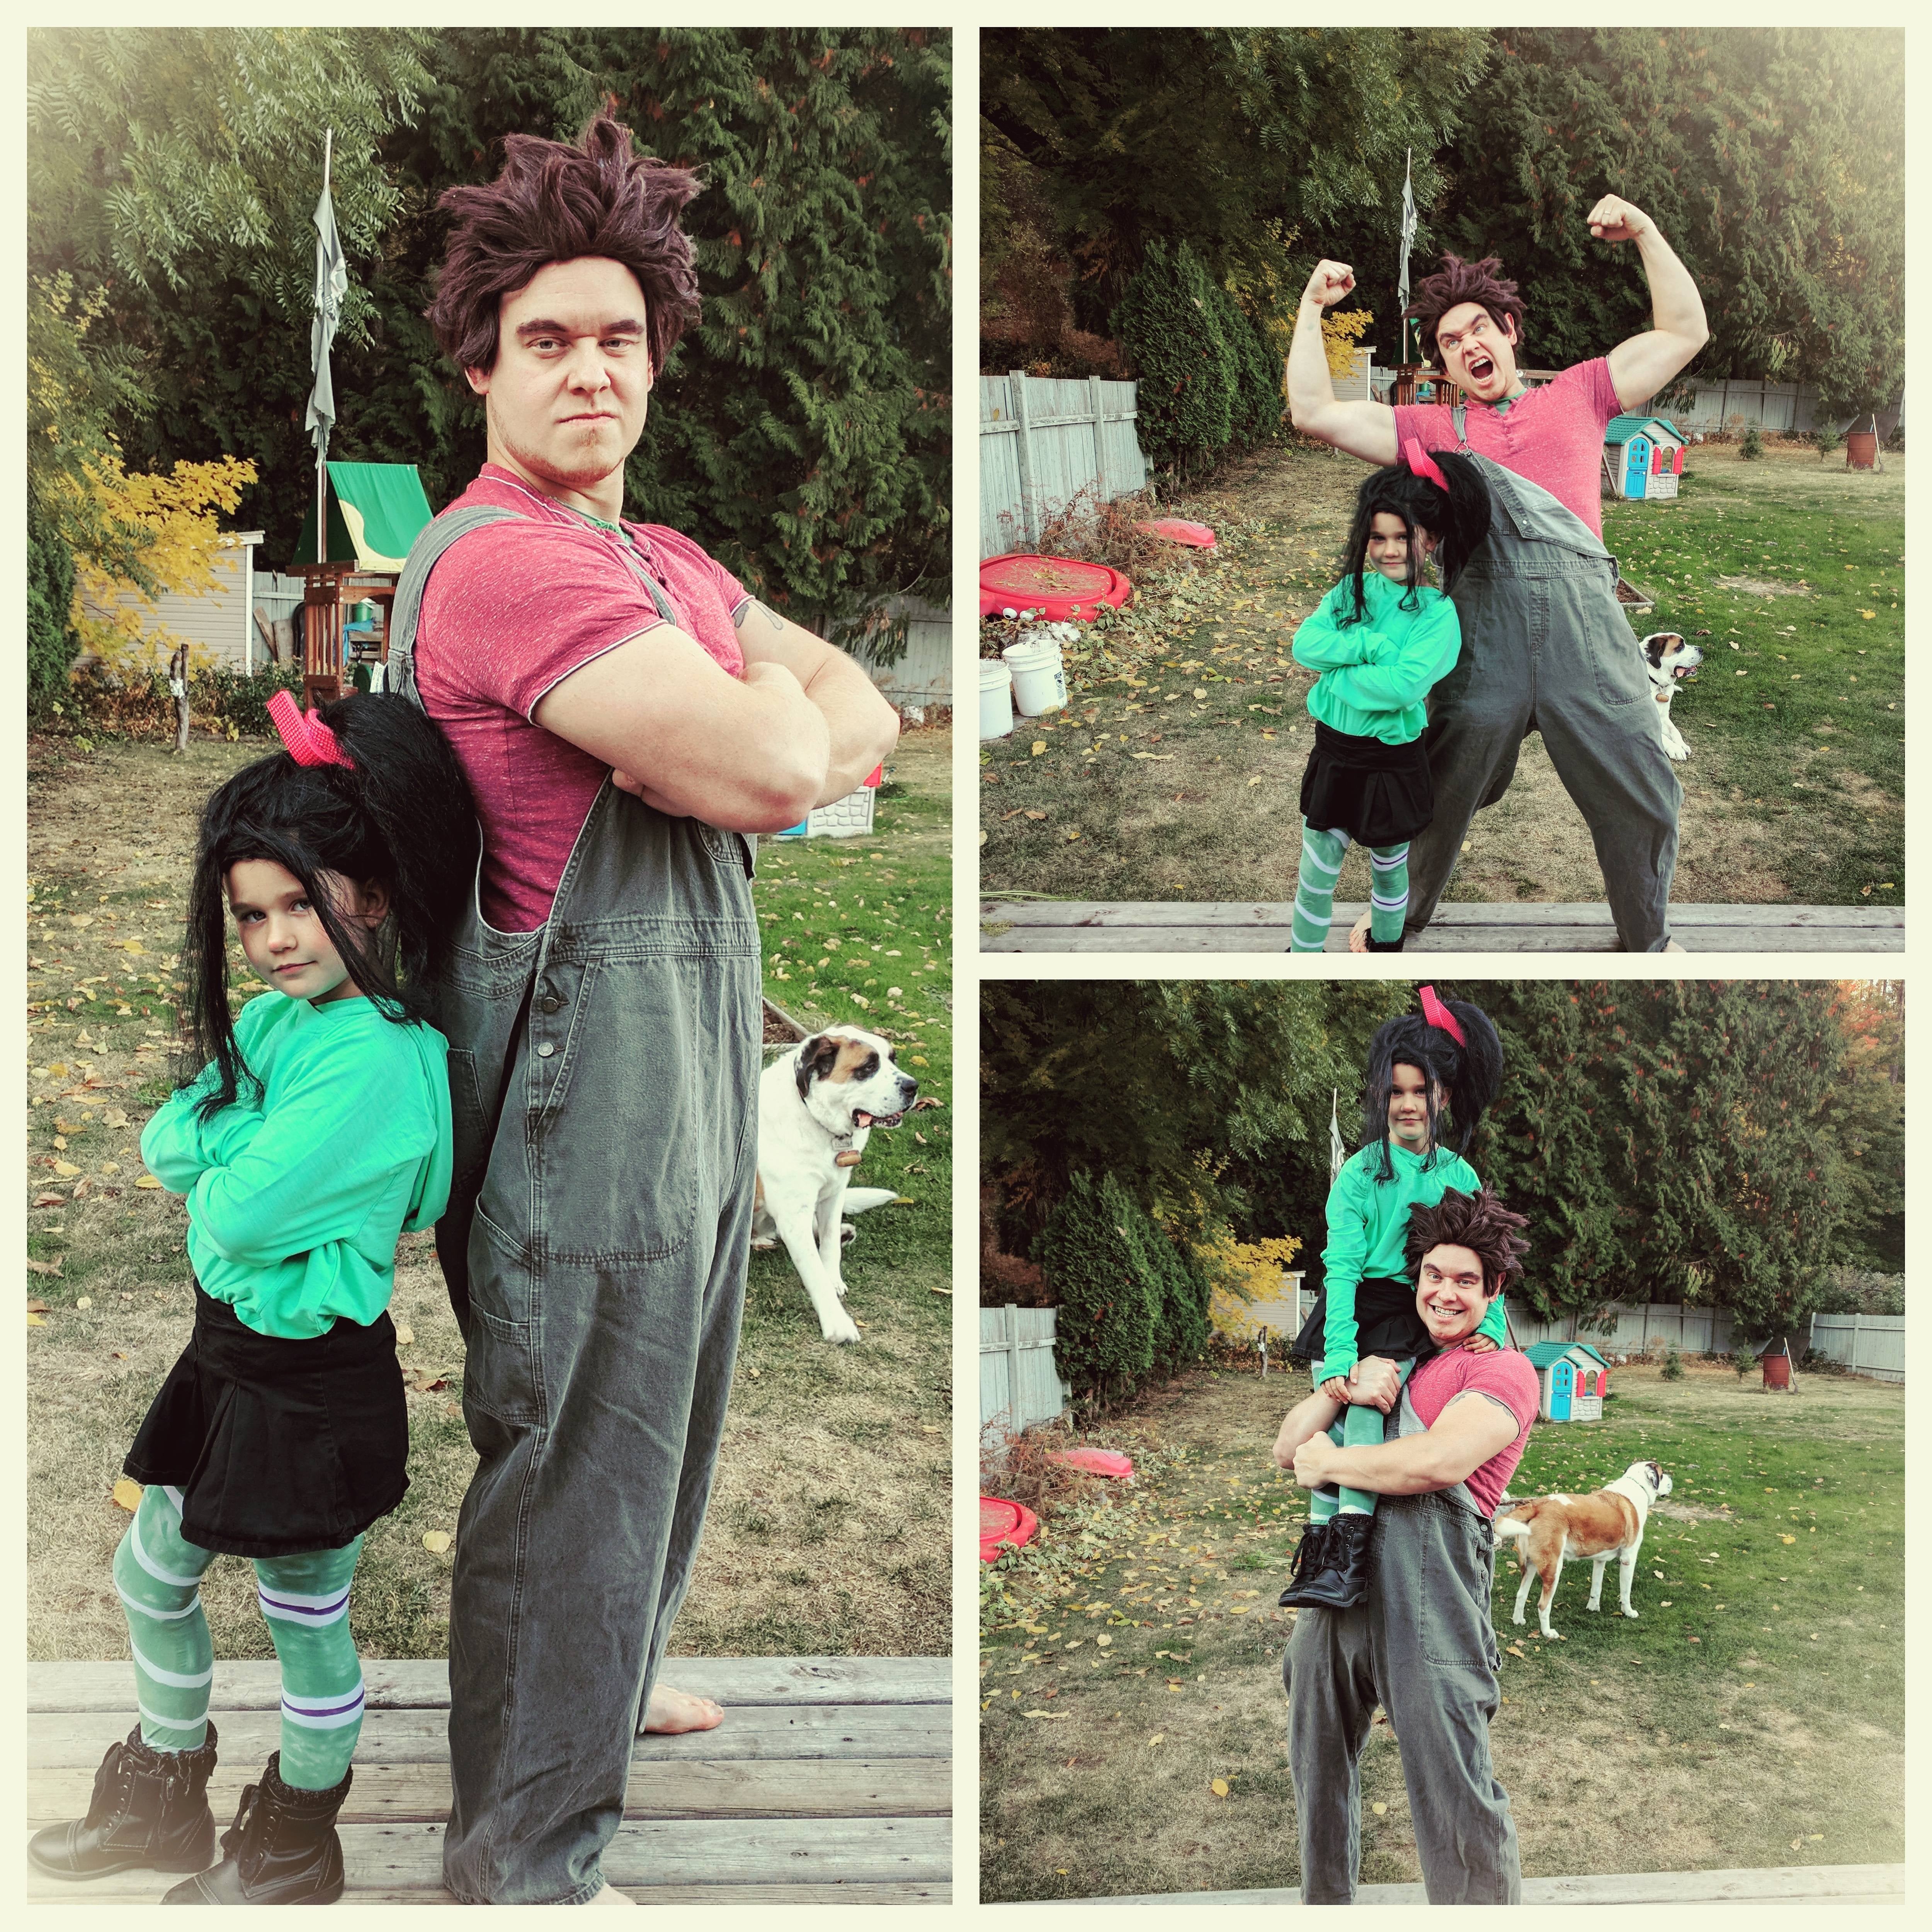 Wreck-It Ralph and Vanellope Halloween costumes - Disney in your Day